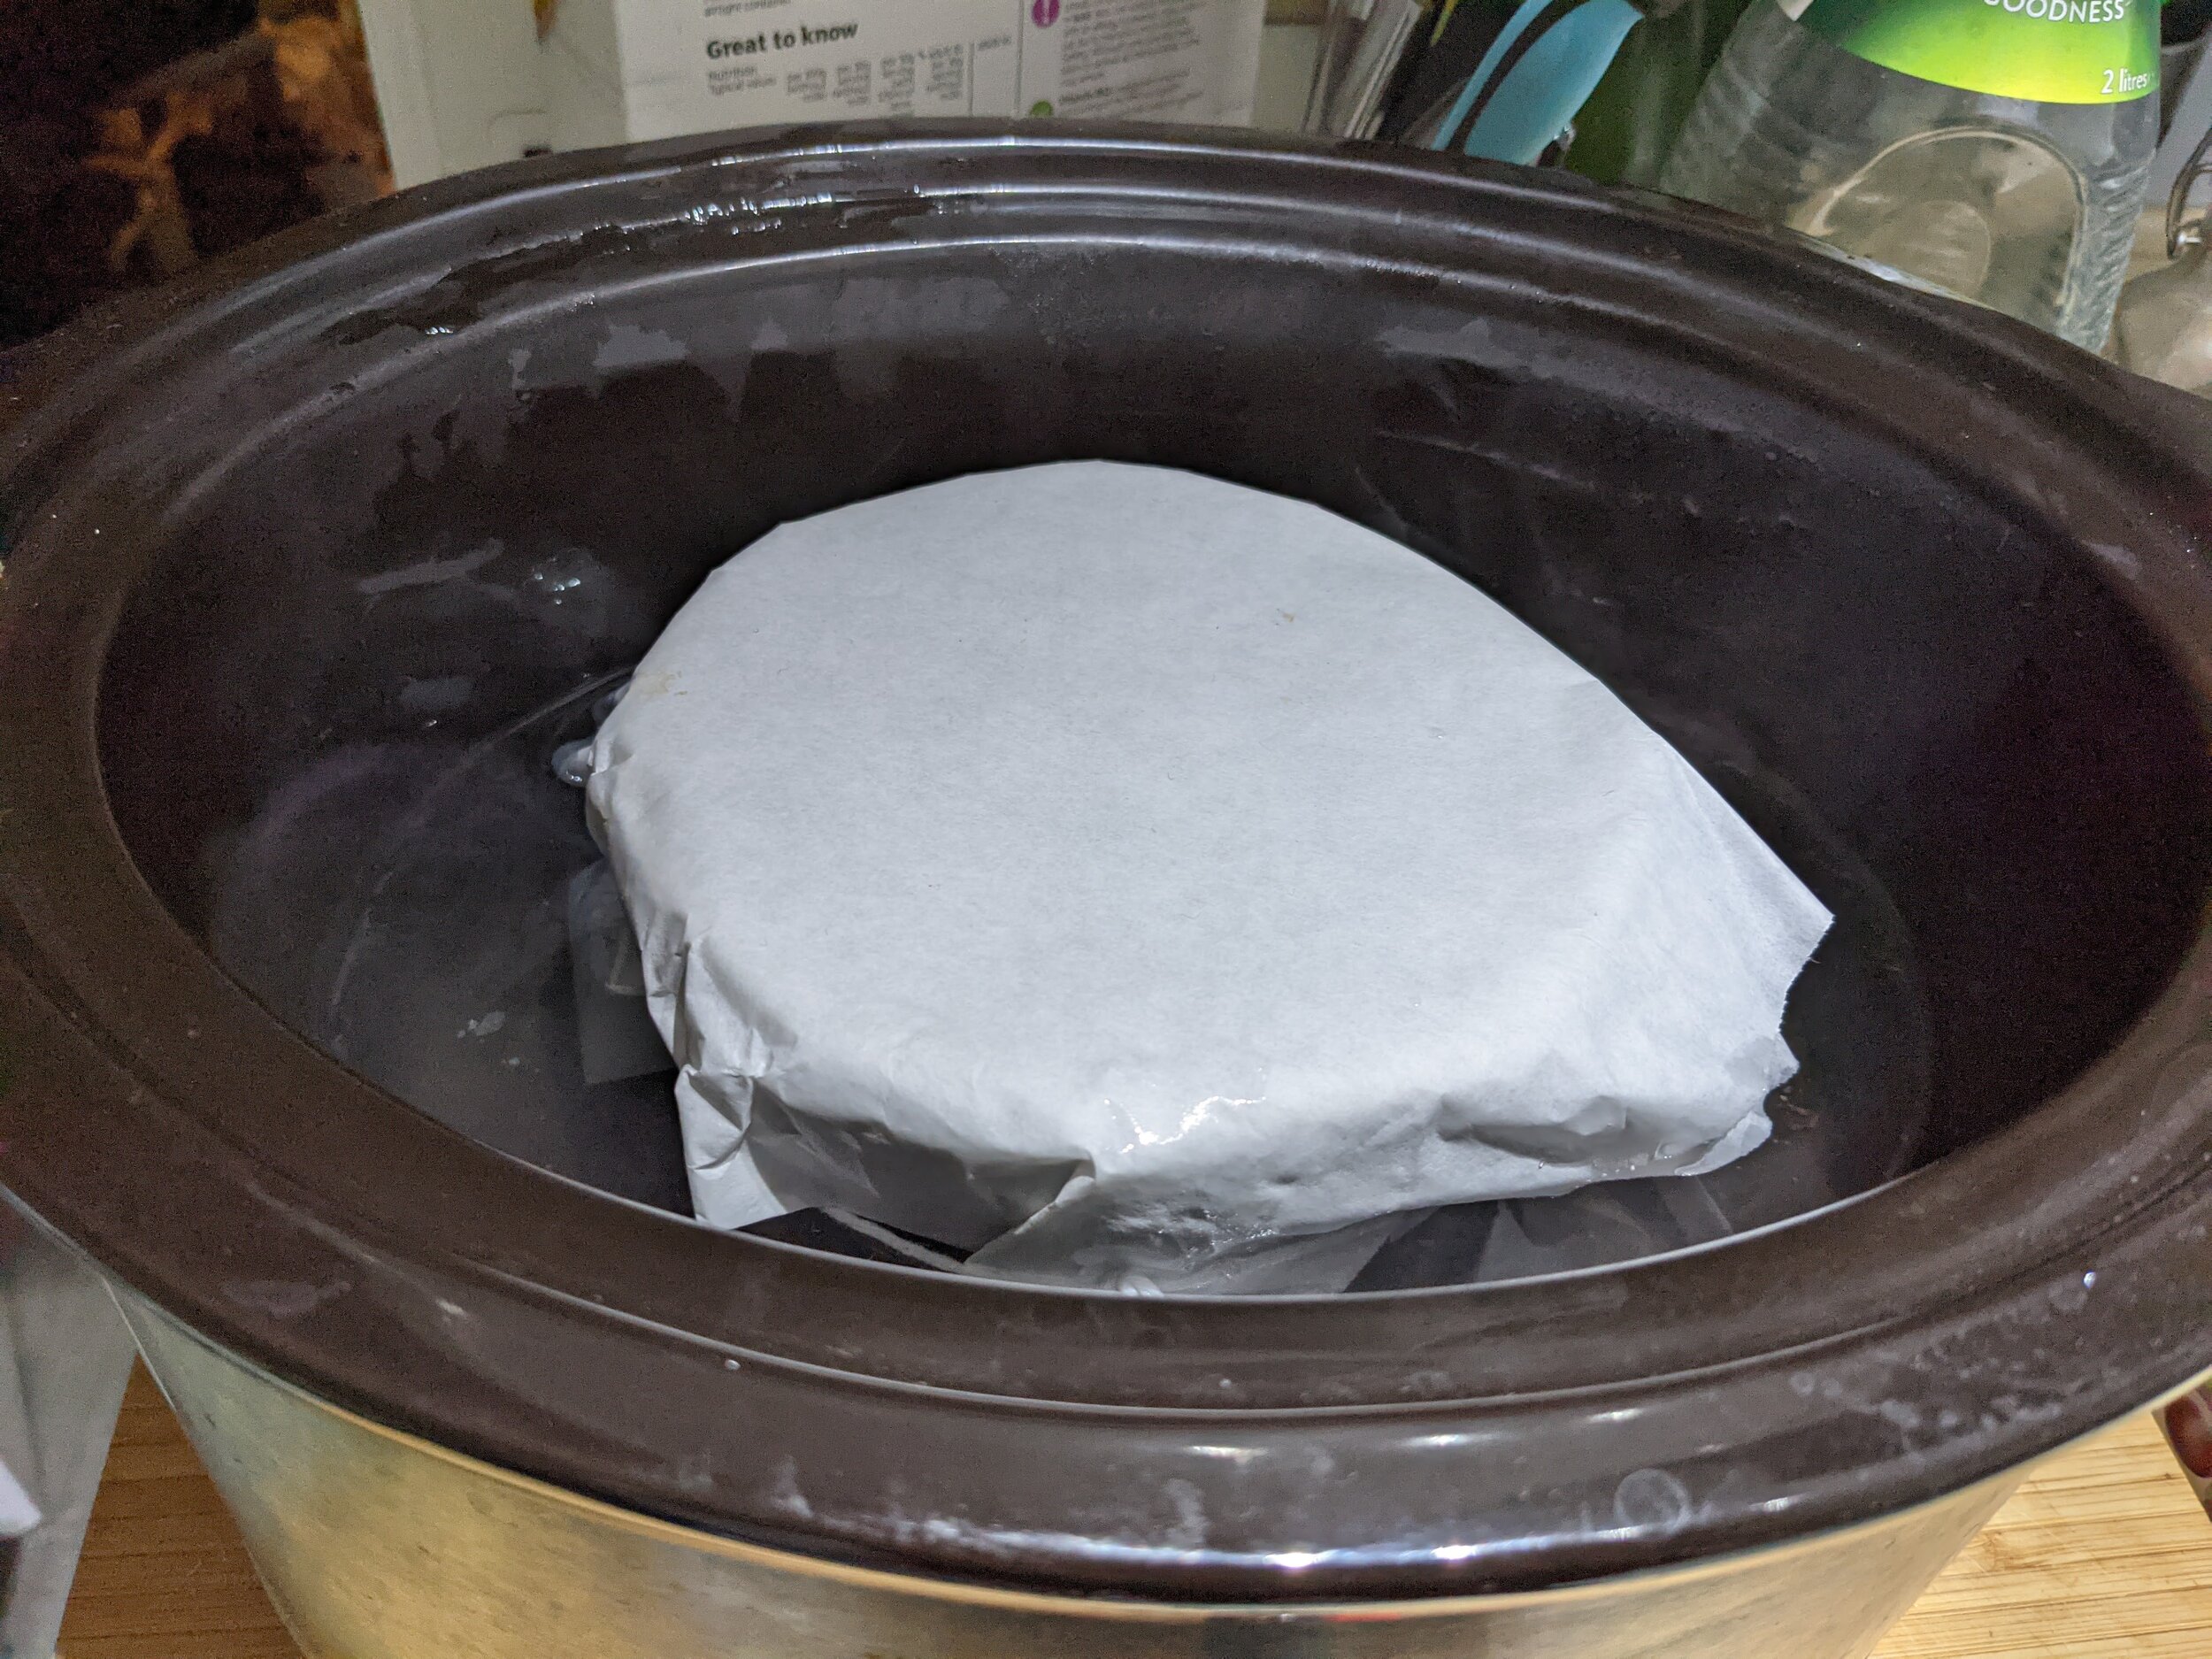 A 1 pint pudding cooking in a slow cooker